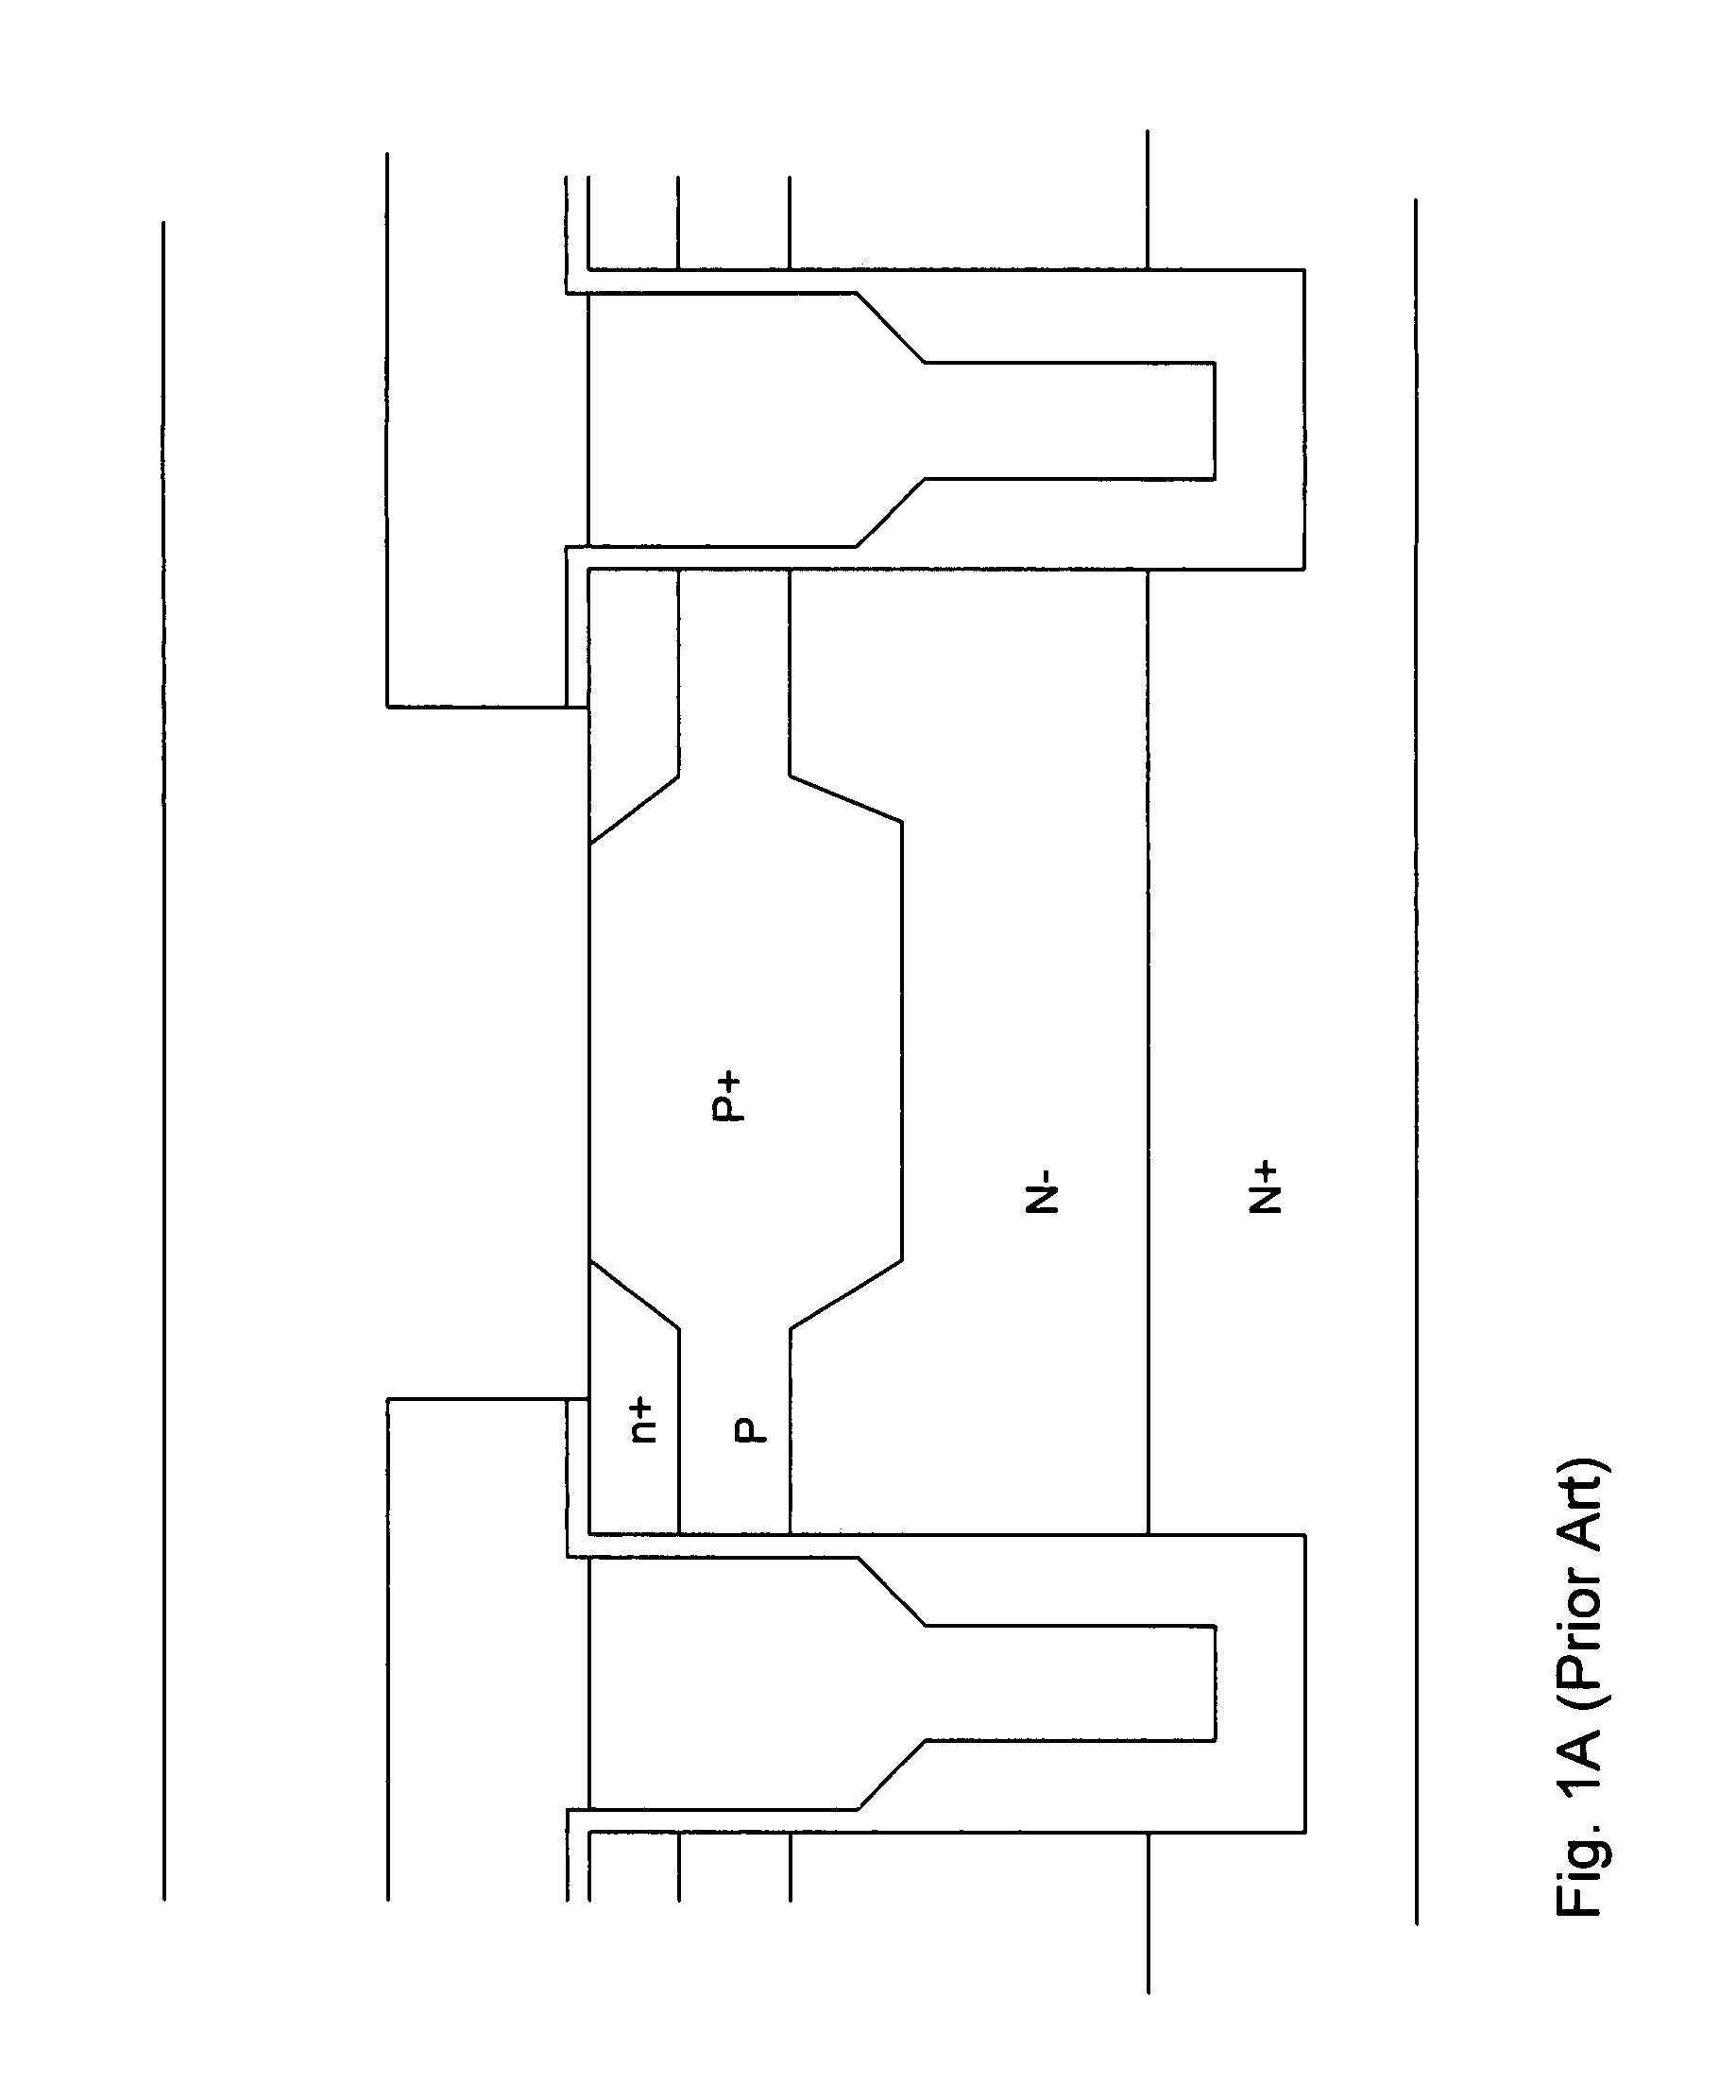 Trench MOSFET with implanted drift region